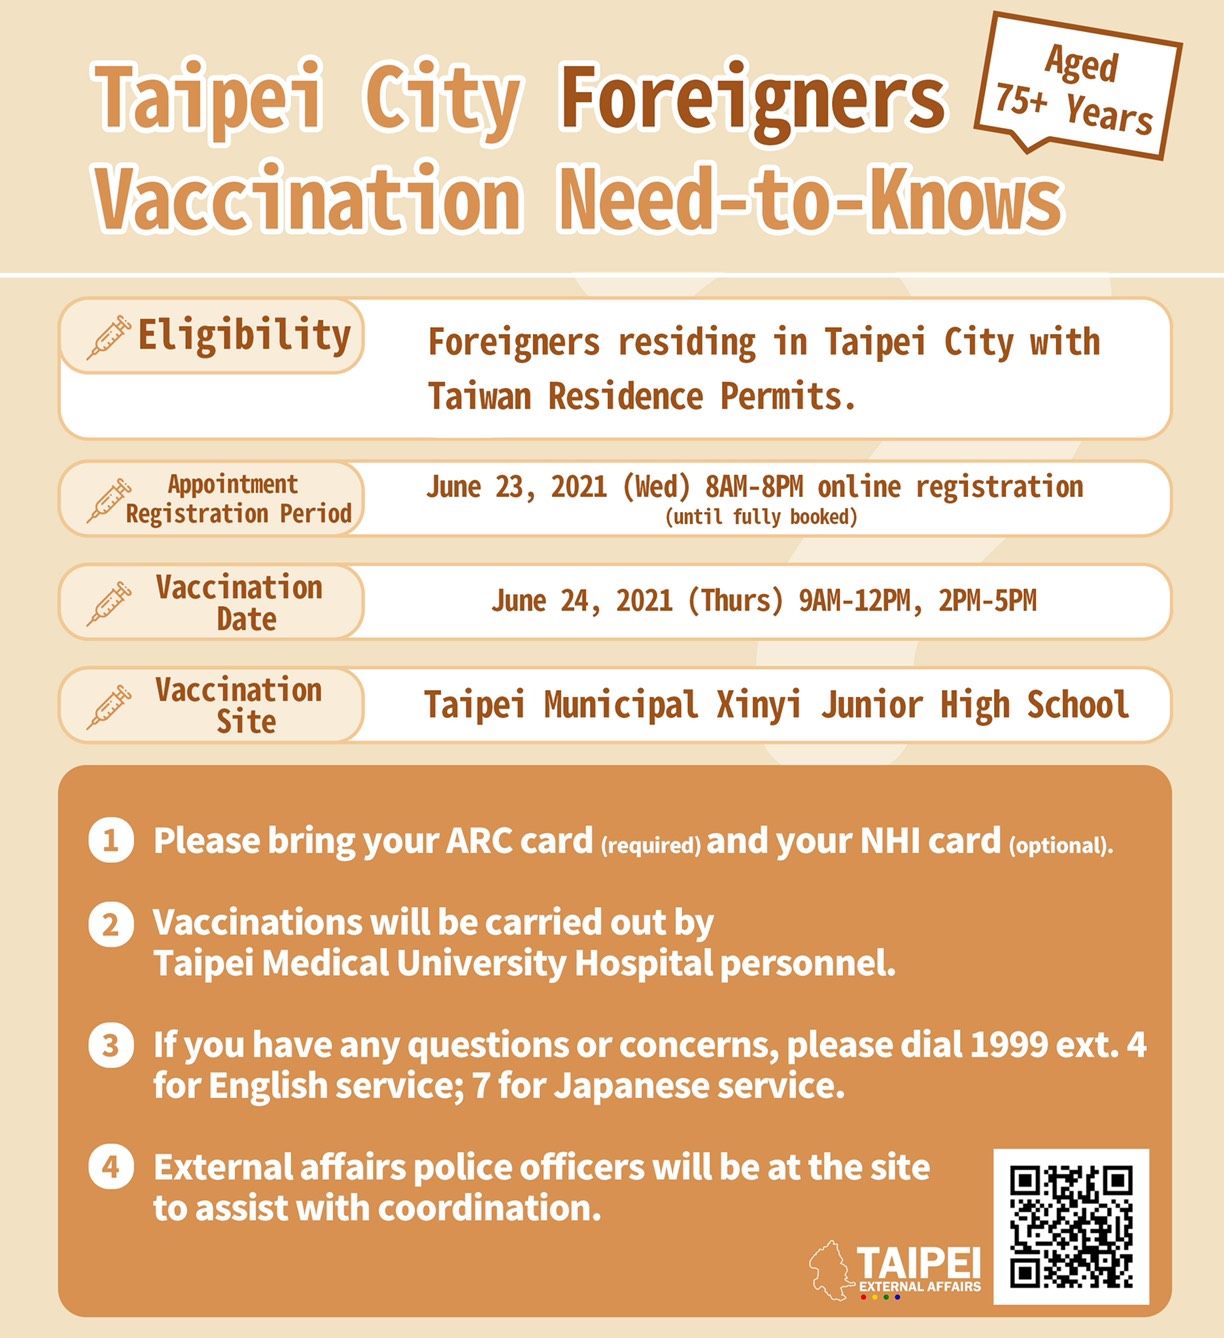 Taipei City Foreigners Aged 75+ Years Vaccination Need-to-Knows